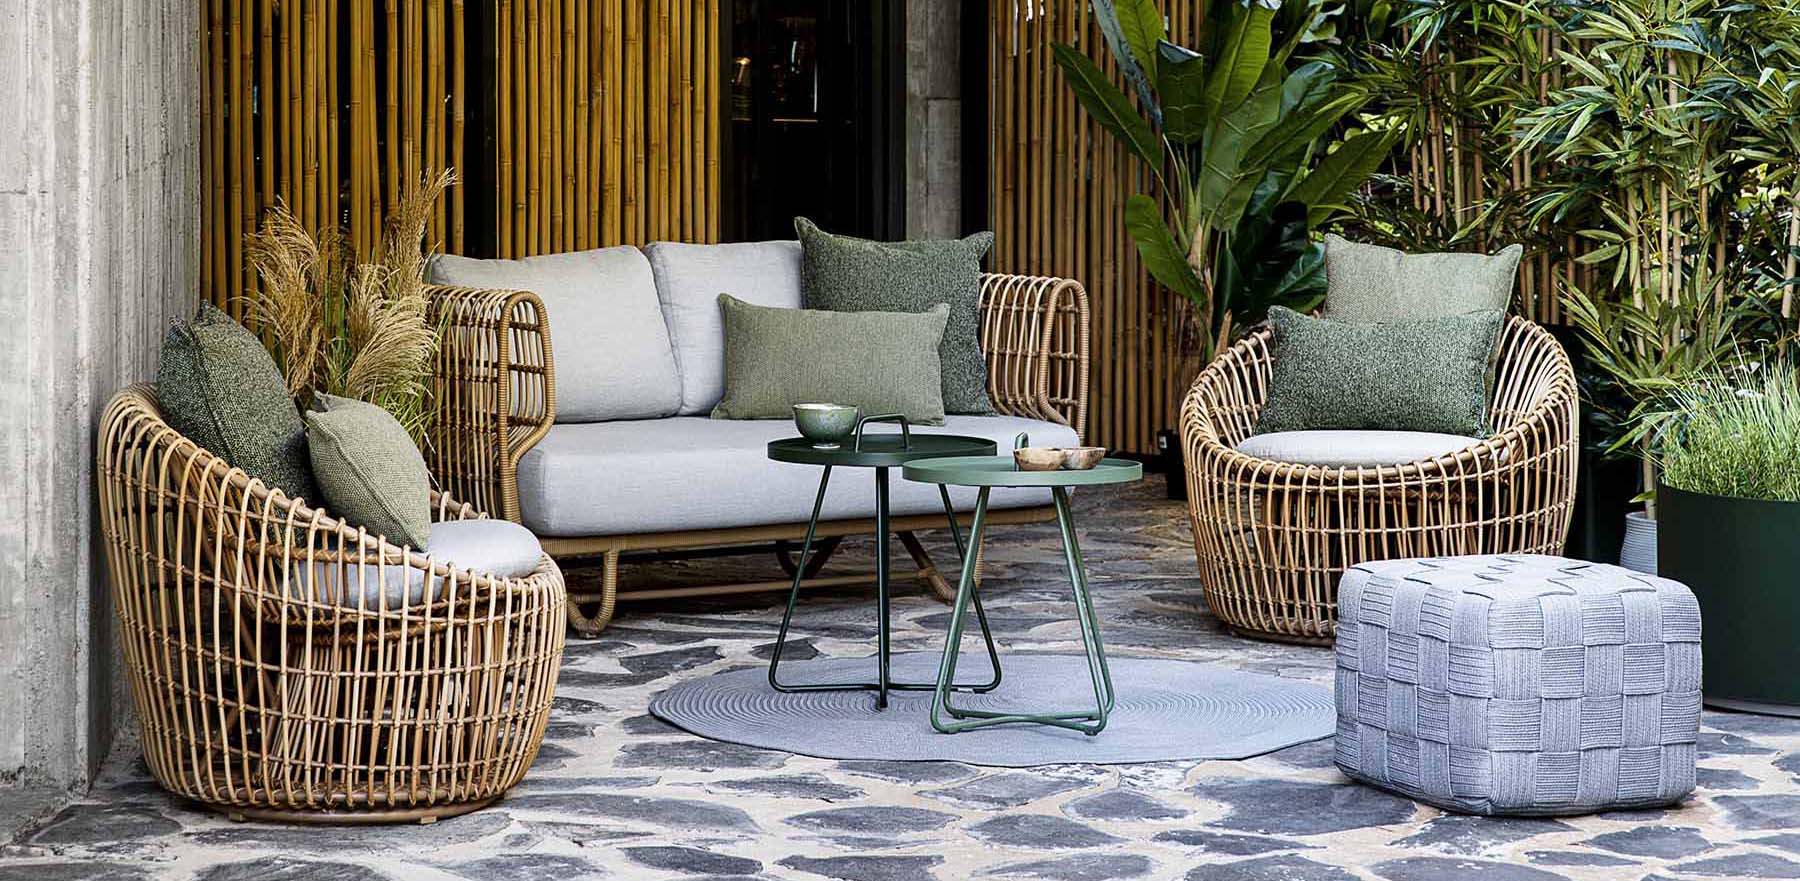 Cane-Line Nest Outdoor Collection & Cube Footstool Lifestyle Image